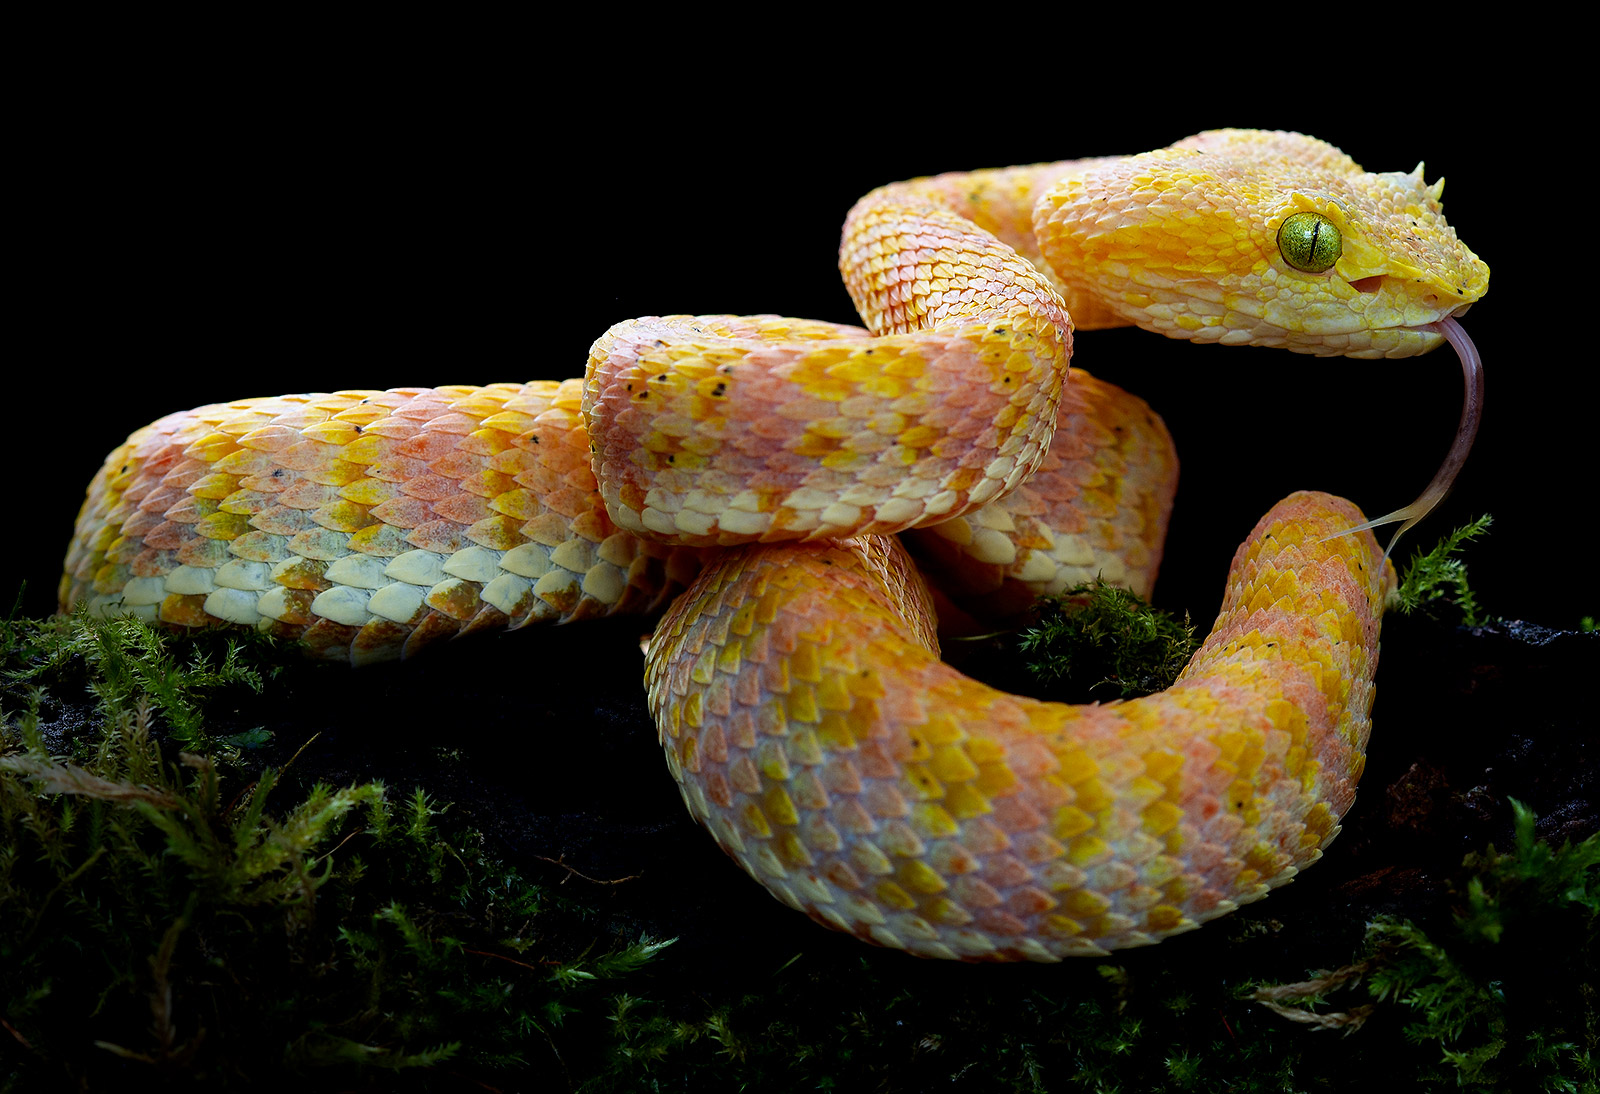 Yellow-pink morph of the newly discovered Bothriechis rahimi